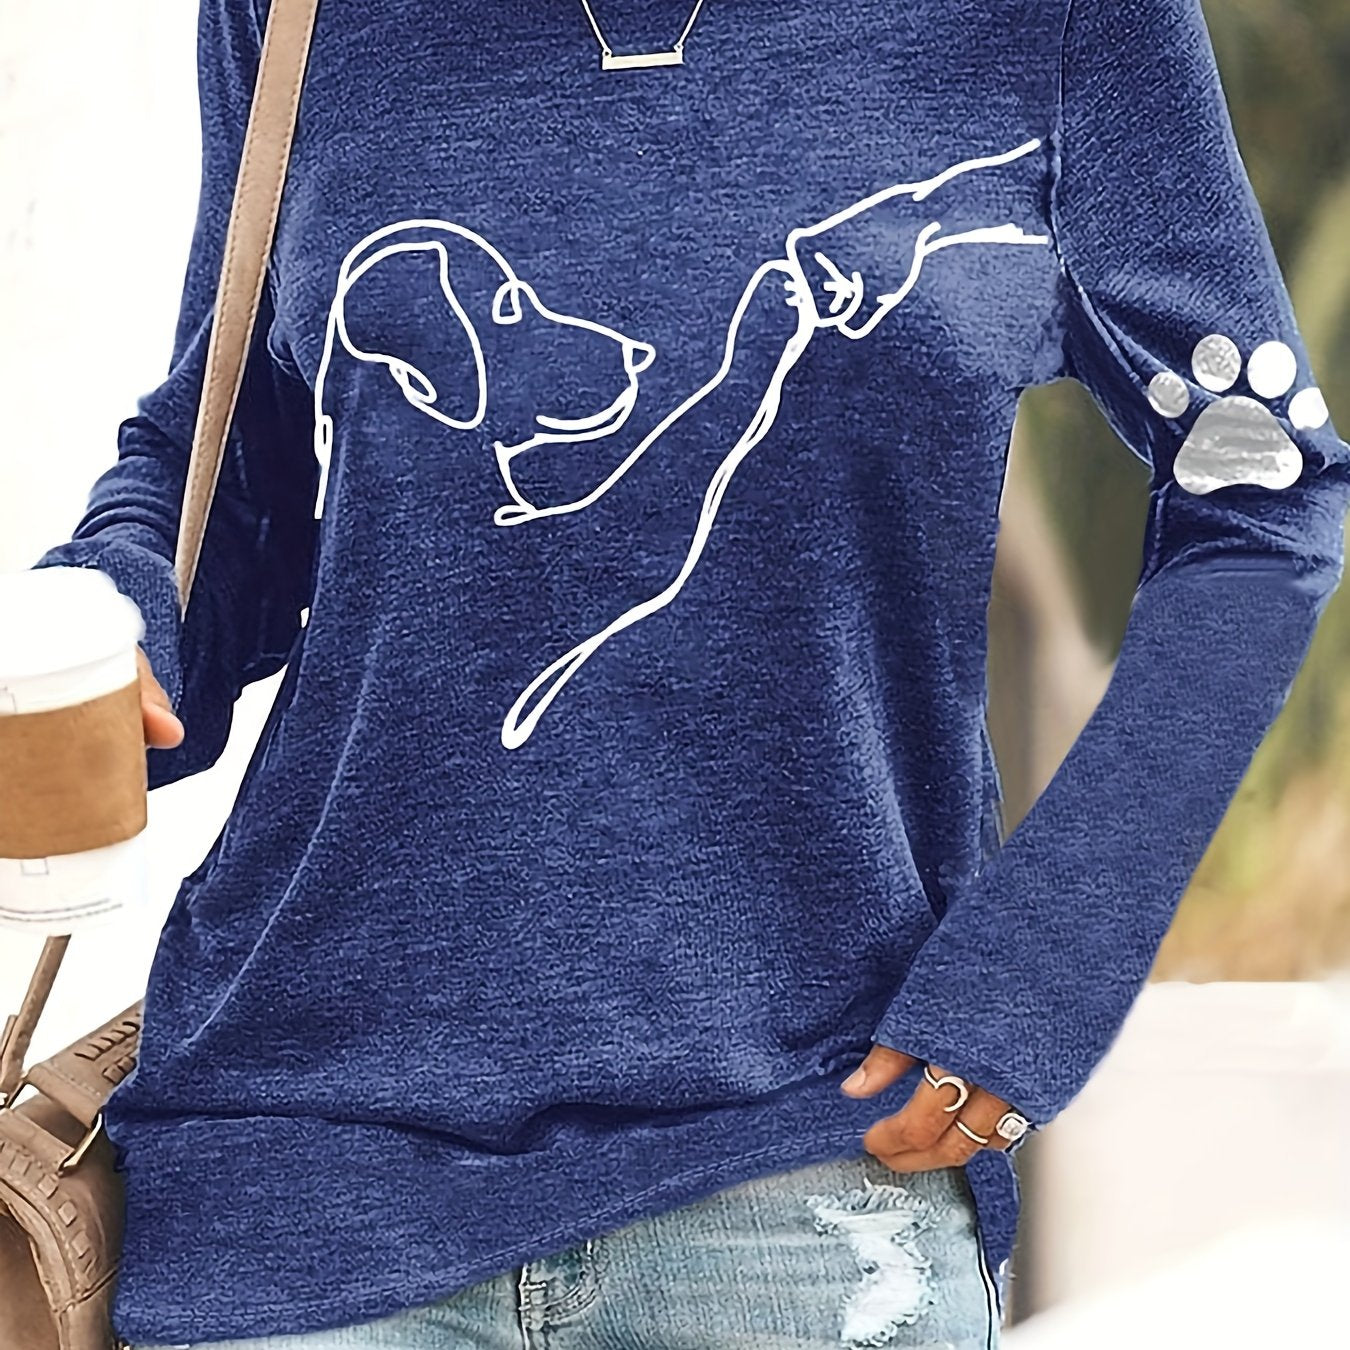 Dog & Paw Print T-shirt, Casual Long Sleeve Top For Spring & Fall, Women's Clothing